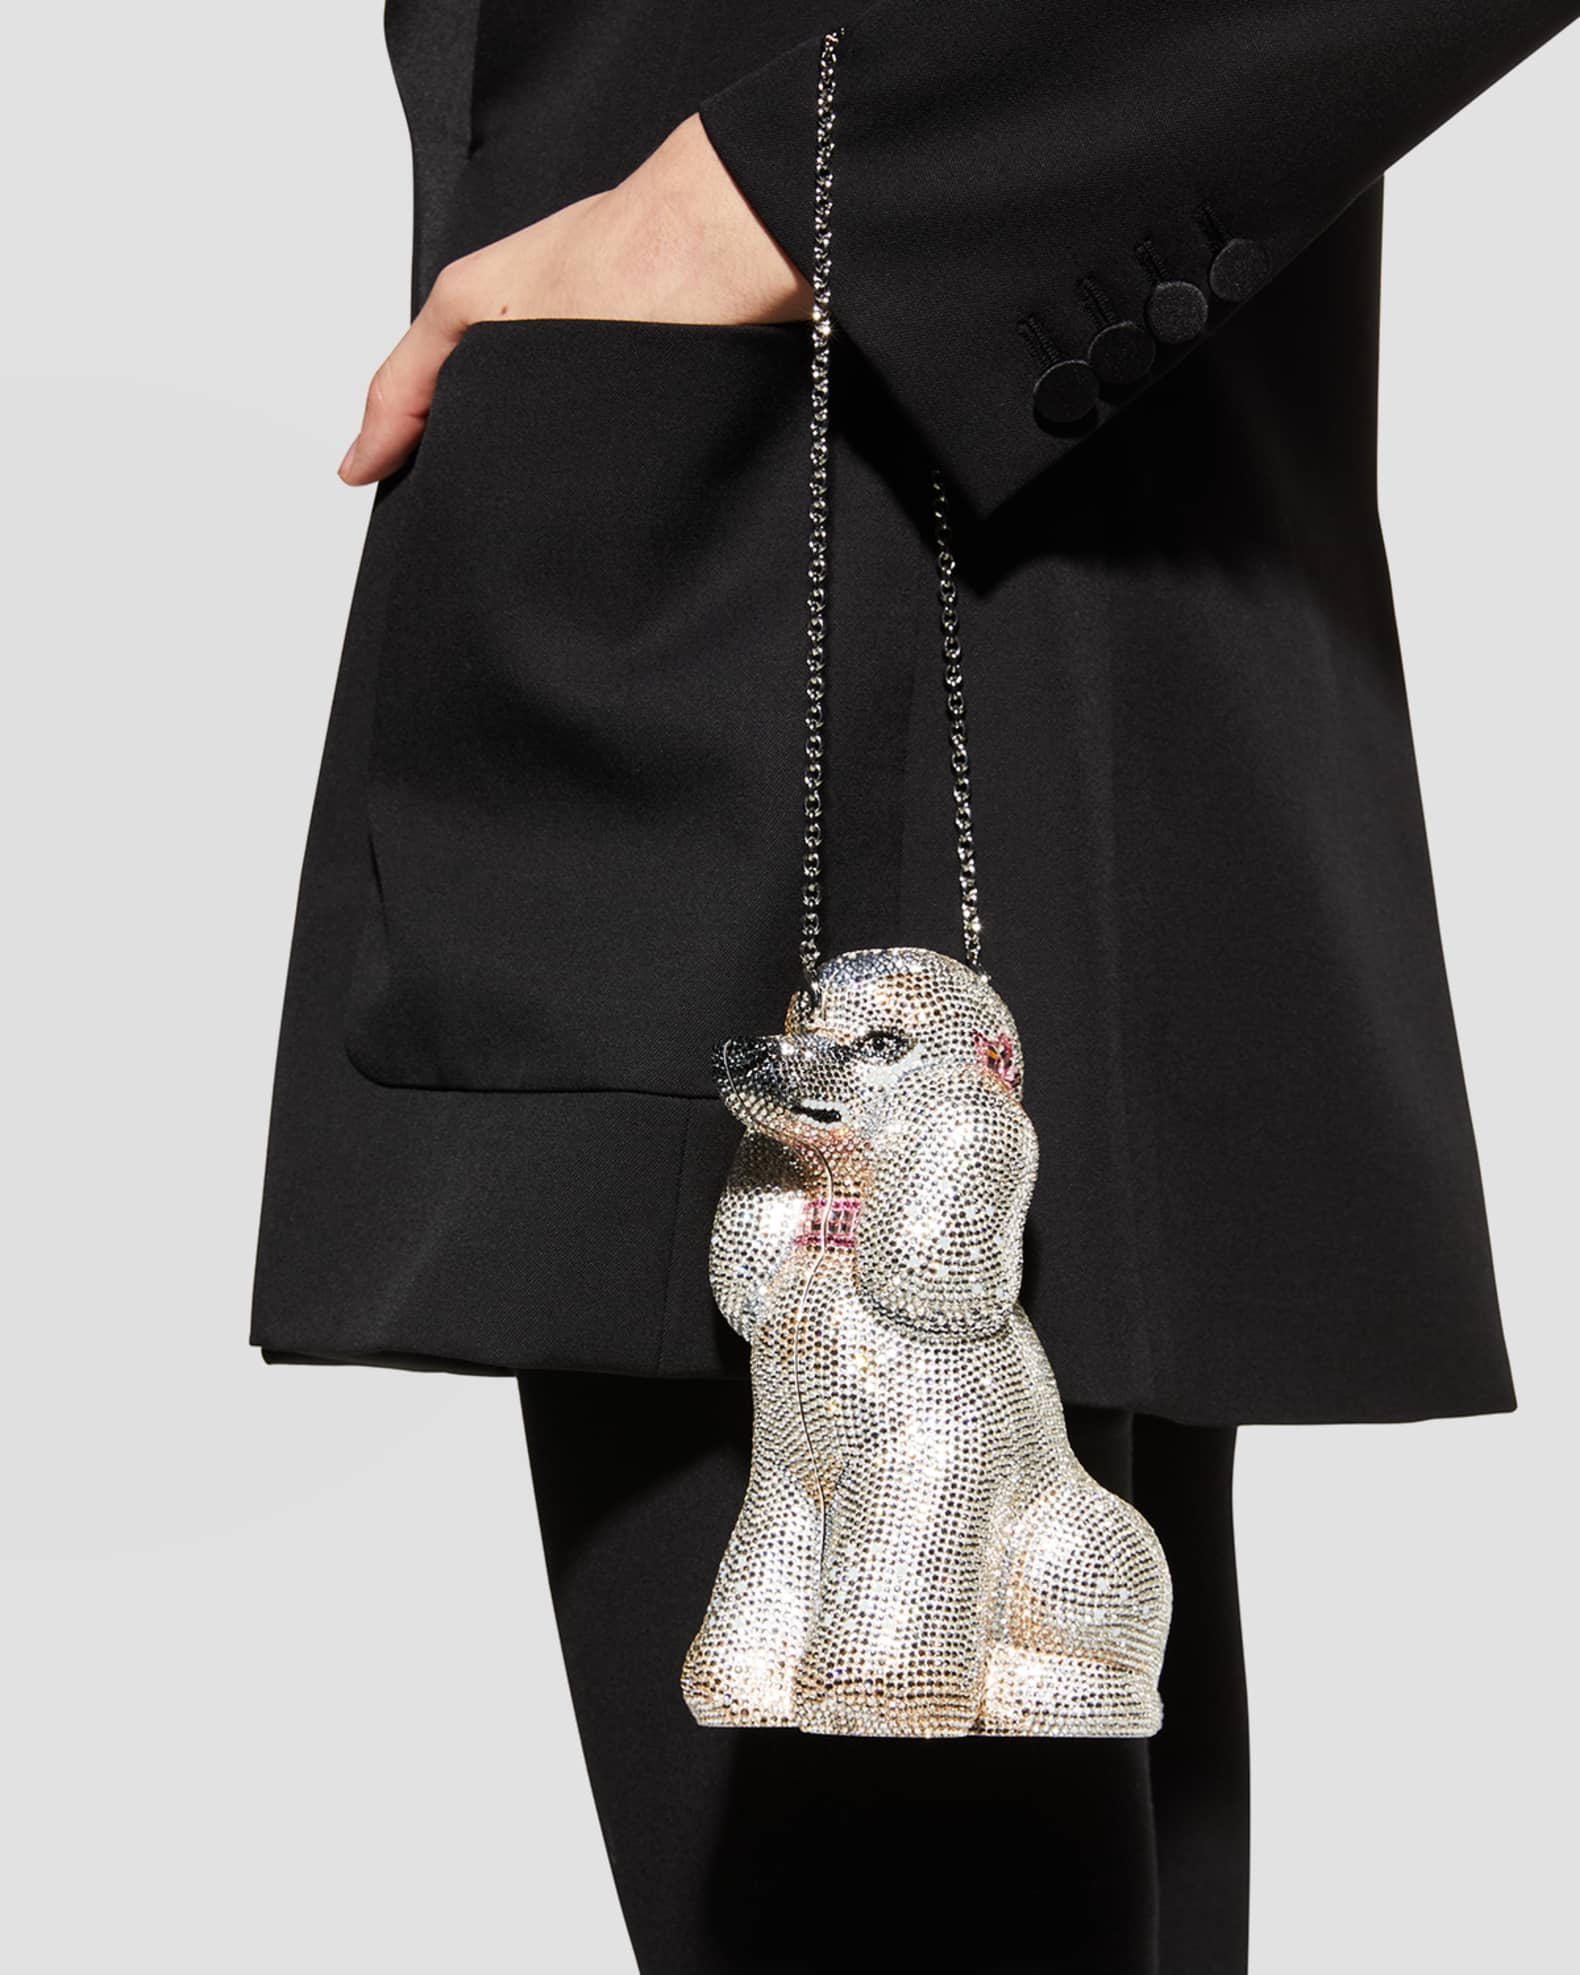 Judith Leiber French Poodle Lucille' Crystal Covered Bag In Metallic